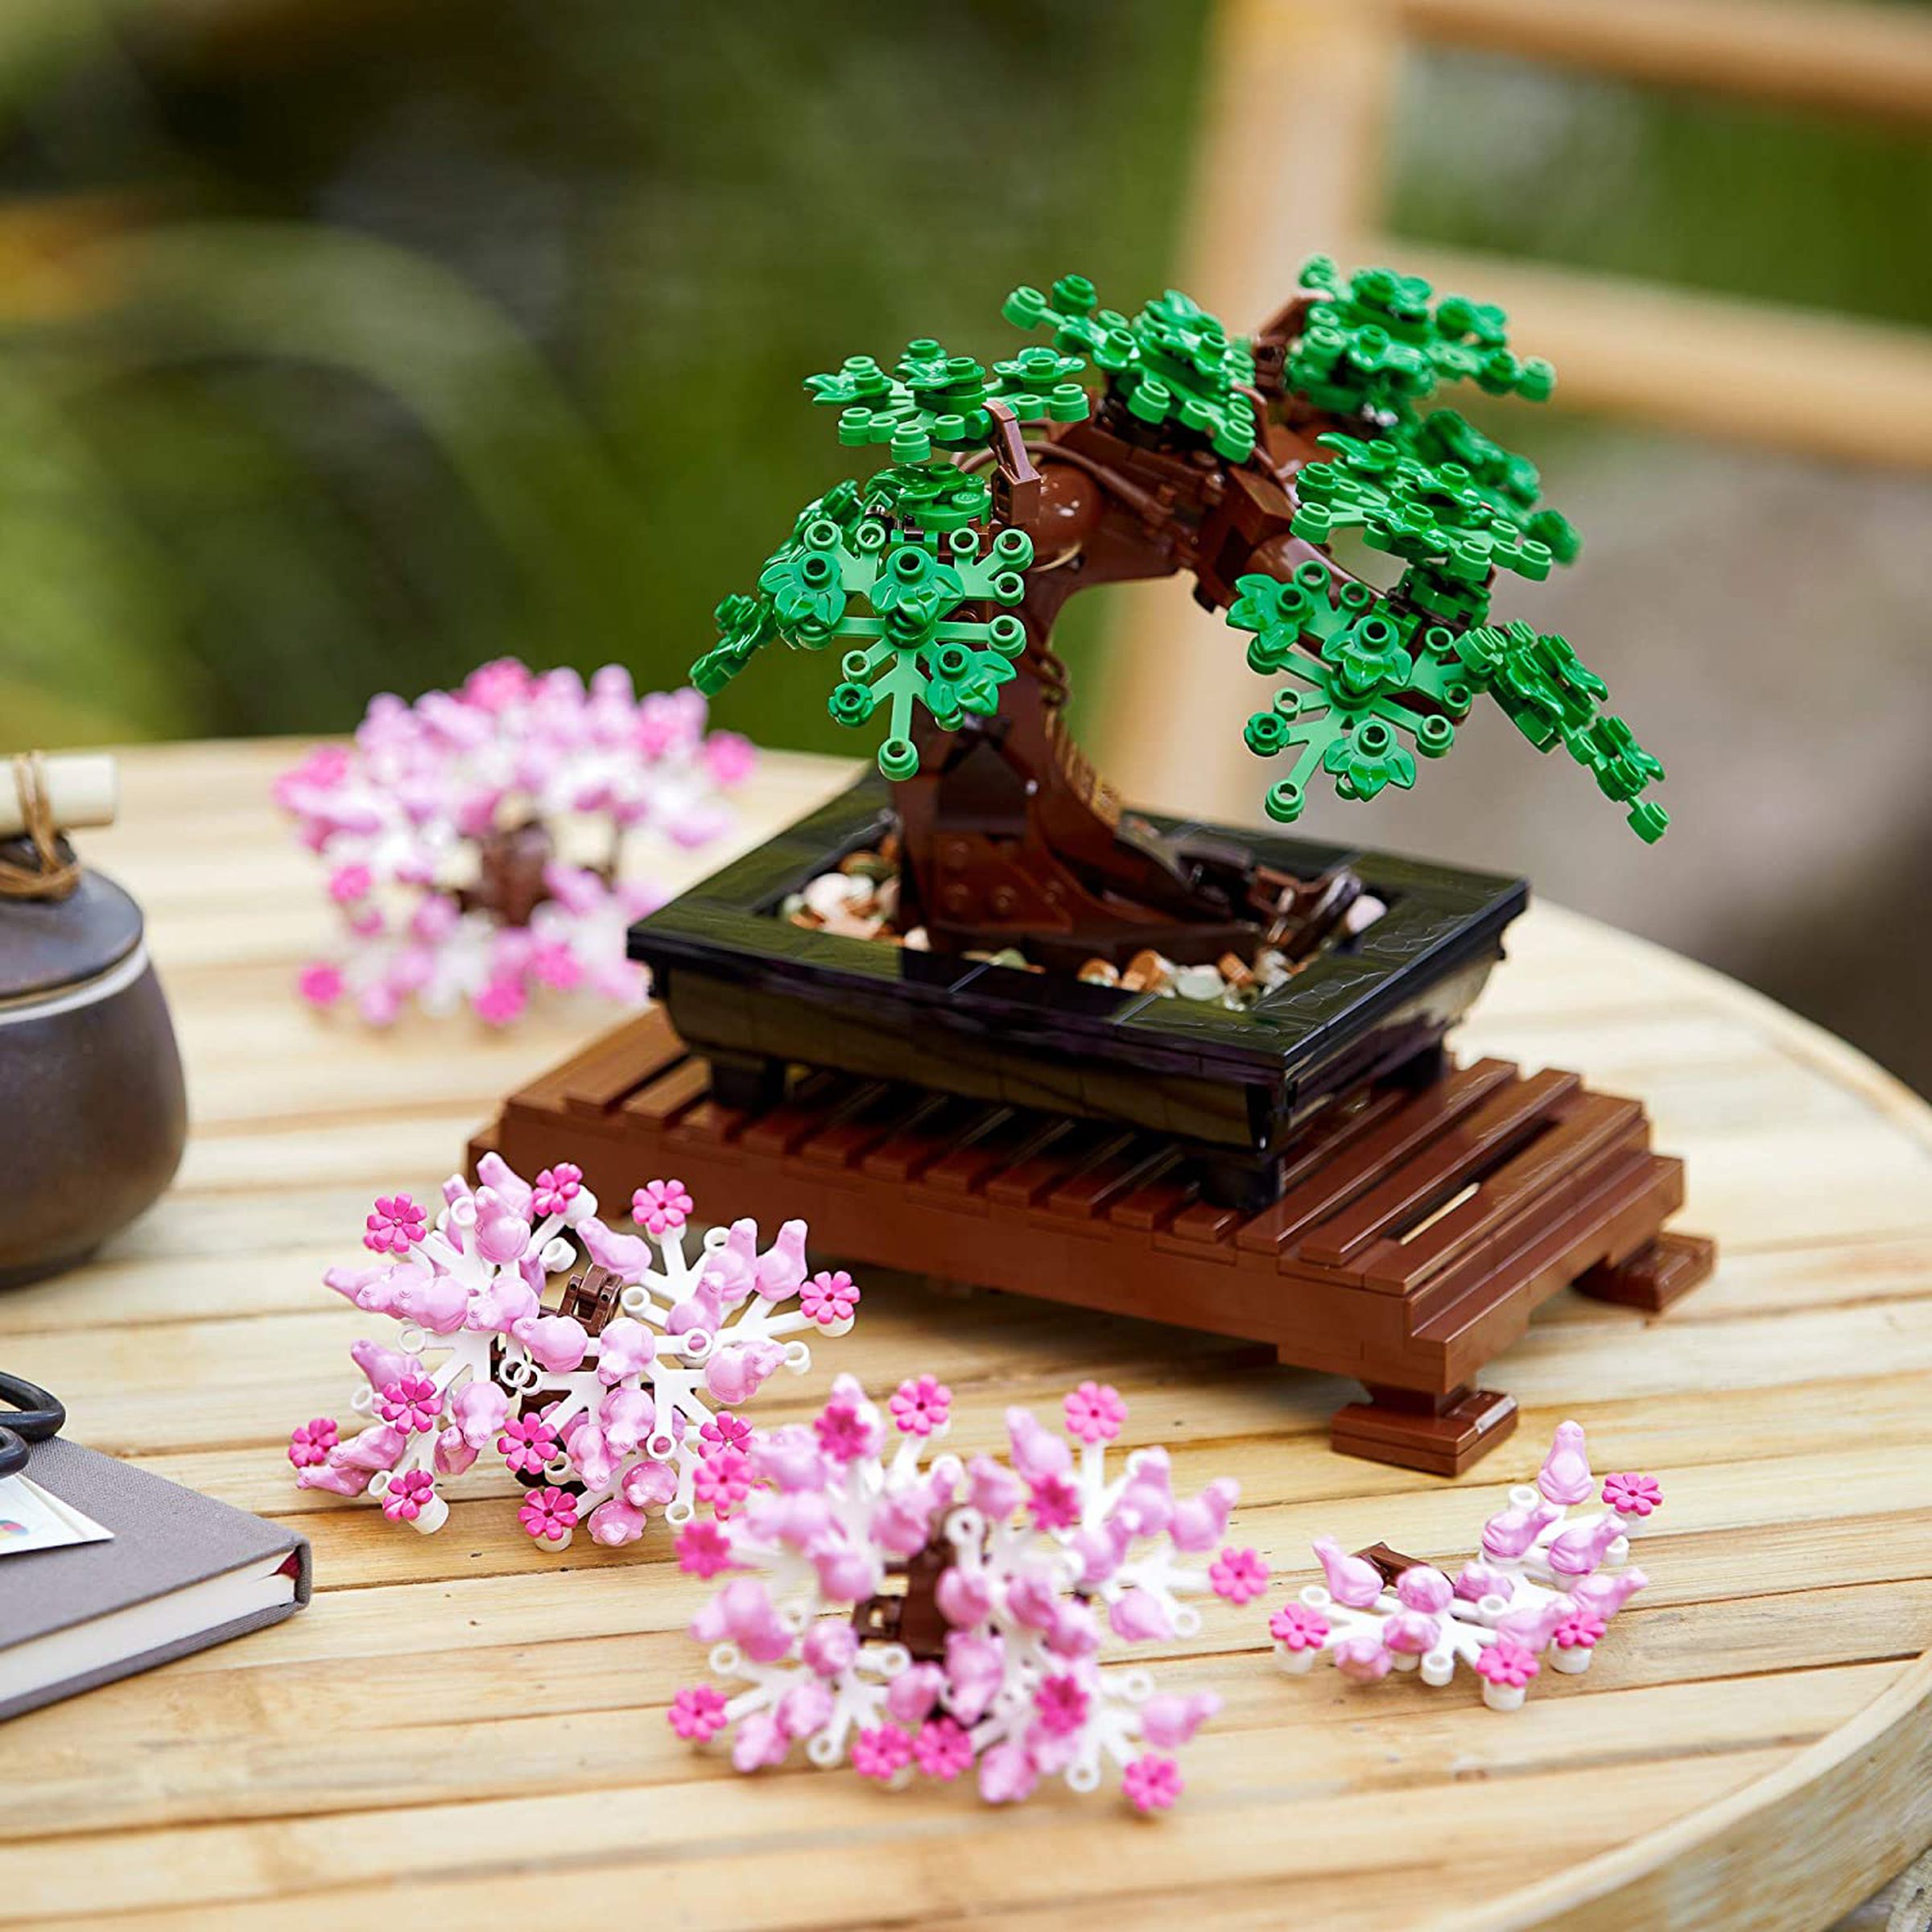 A fully assembled Lego Bonsai Tree set resting on a table.